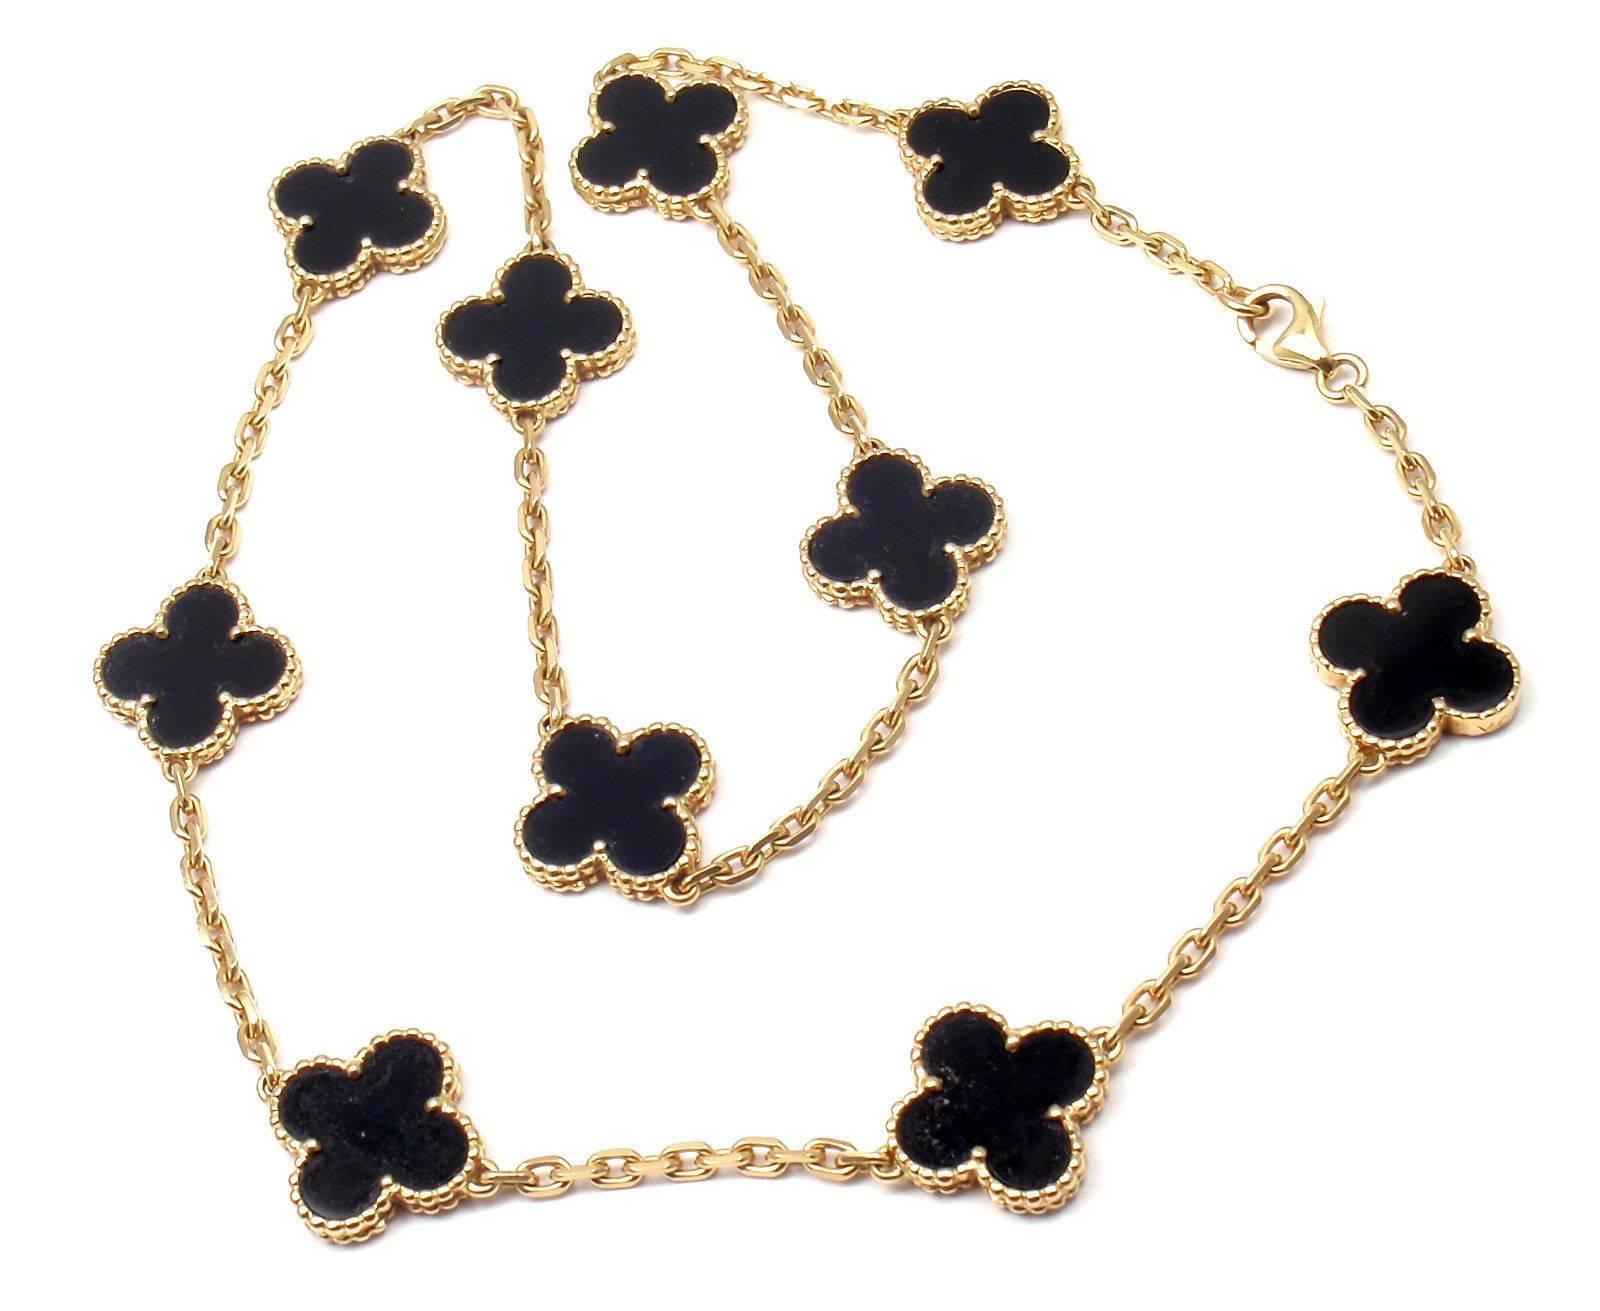 18k Yellow Gold Alhambra Ten Motif Black Onyx Necklace by
Van Cleef & Arpels, 
With 10 motifs of black onyx Alhambra stones, 15mm each.

Details:
Length: 17